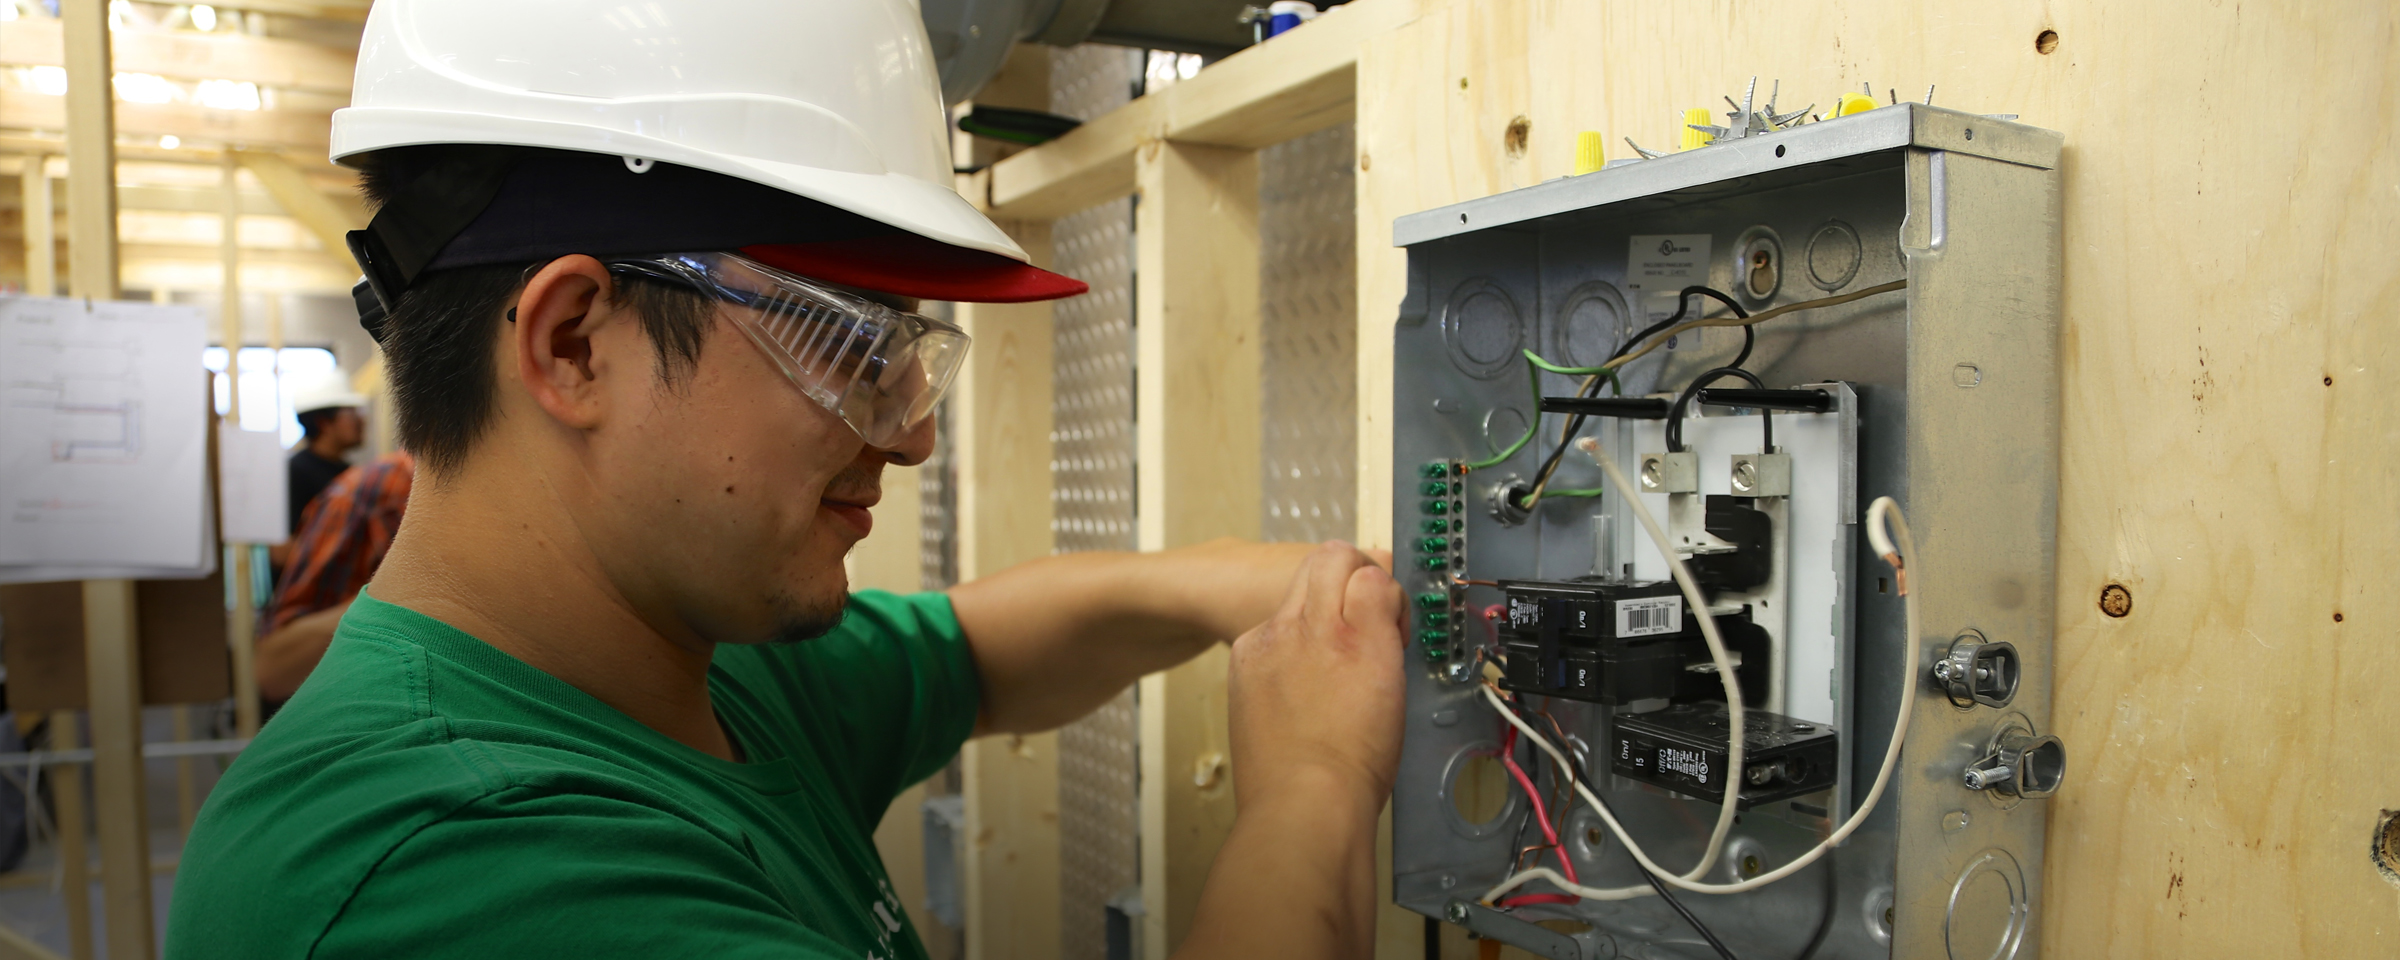 Electrician student wiring a breaker box at a simulated construction site